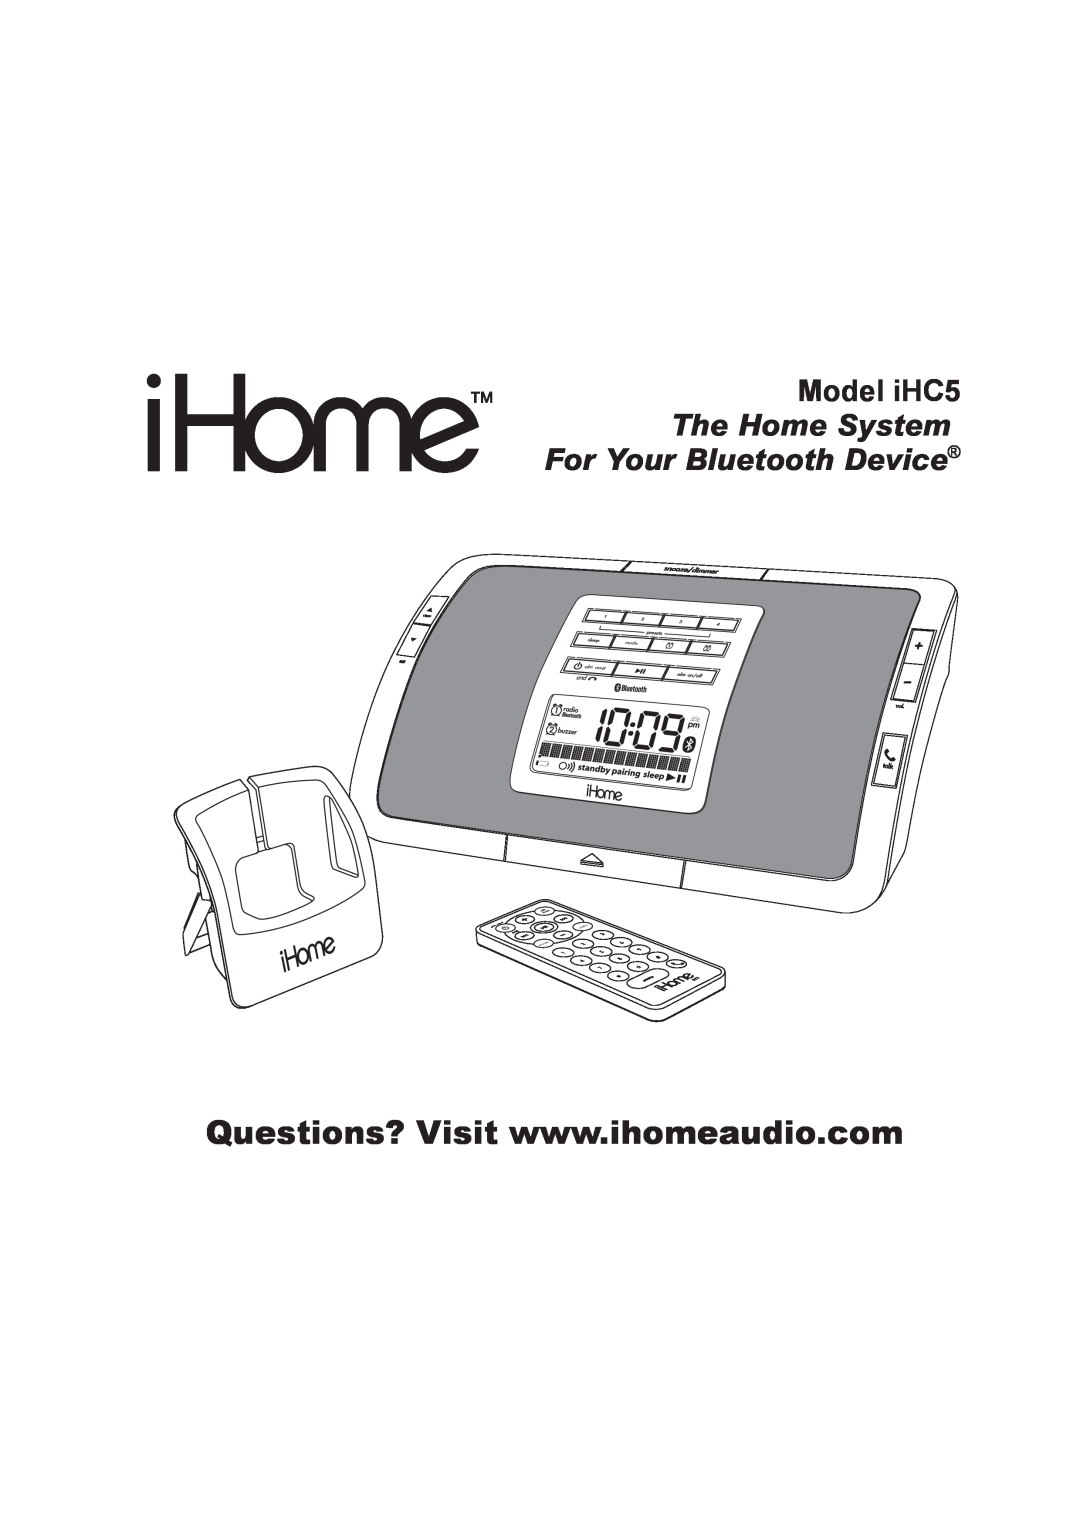 iHome manual Model iHC5, The Home System For Your Bluetooth Device, mode alm reset end, clear, snooze 